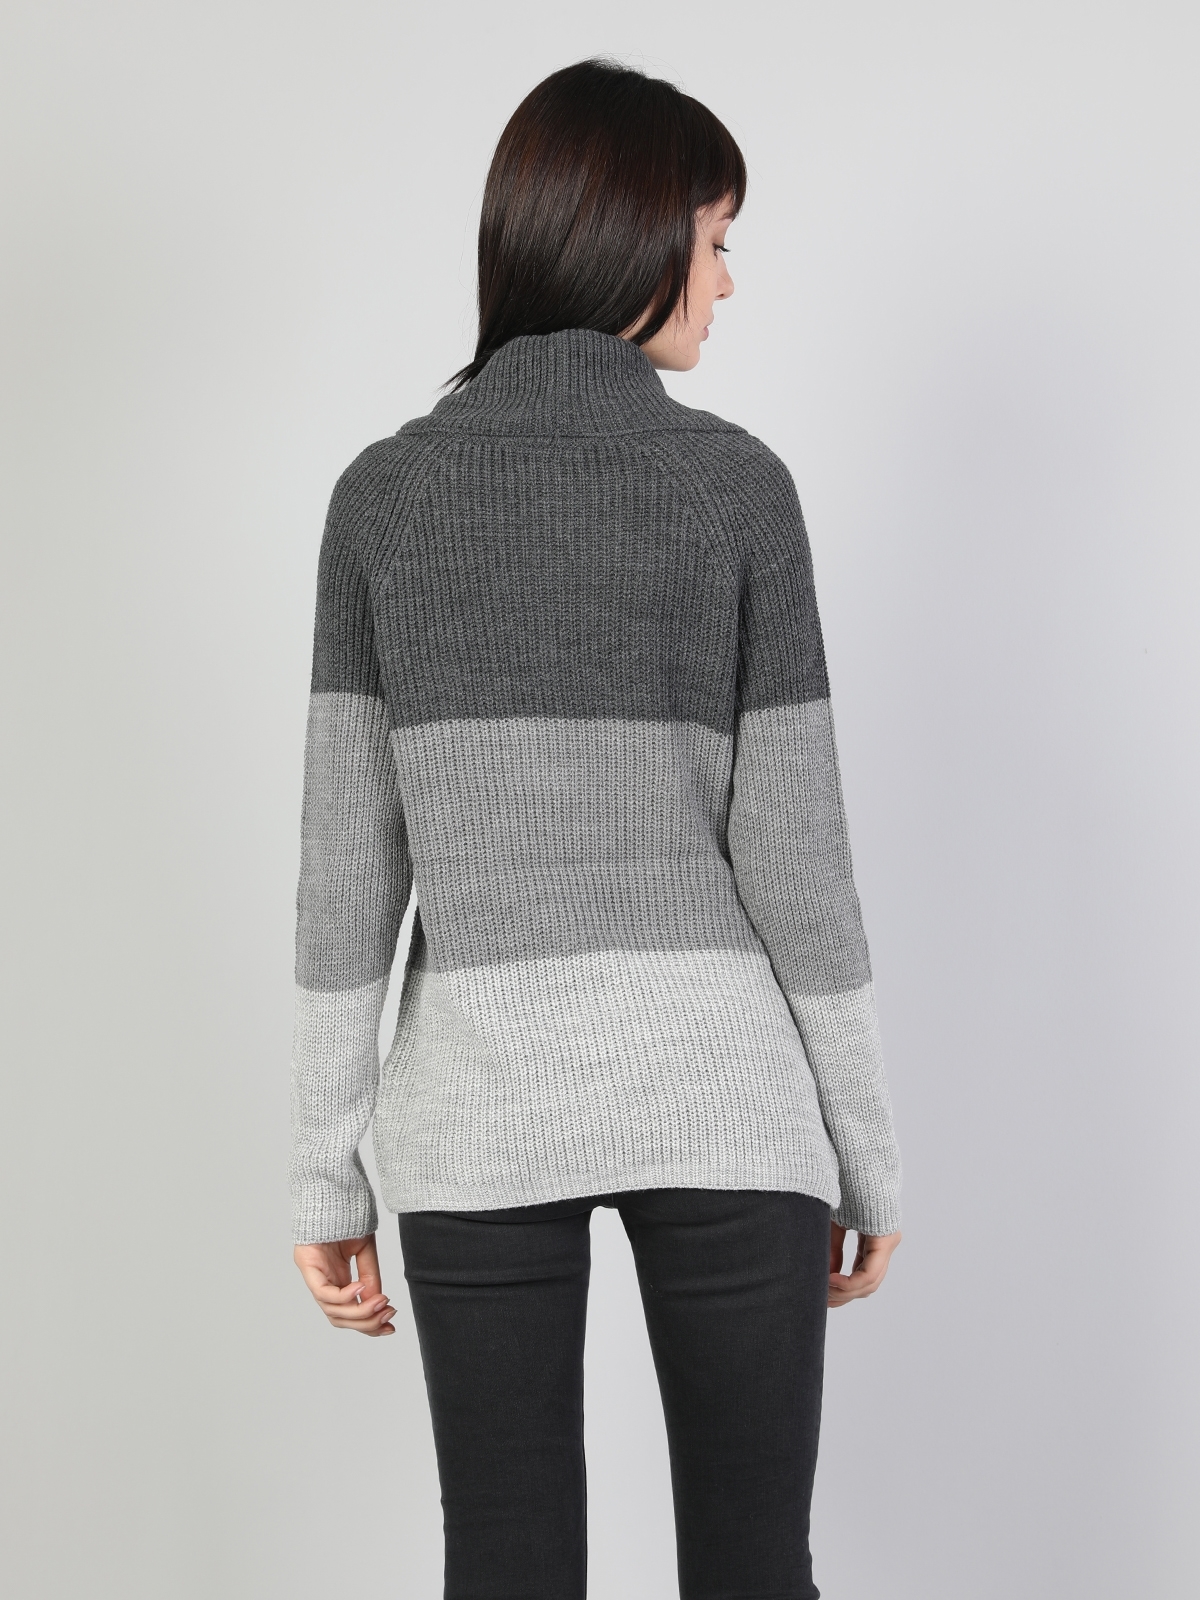 Colins Gray Woman Sweaters. 2